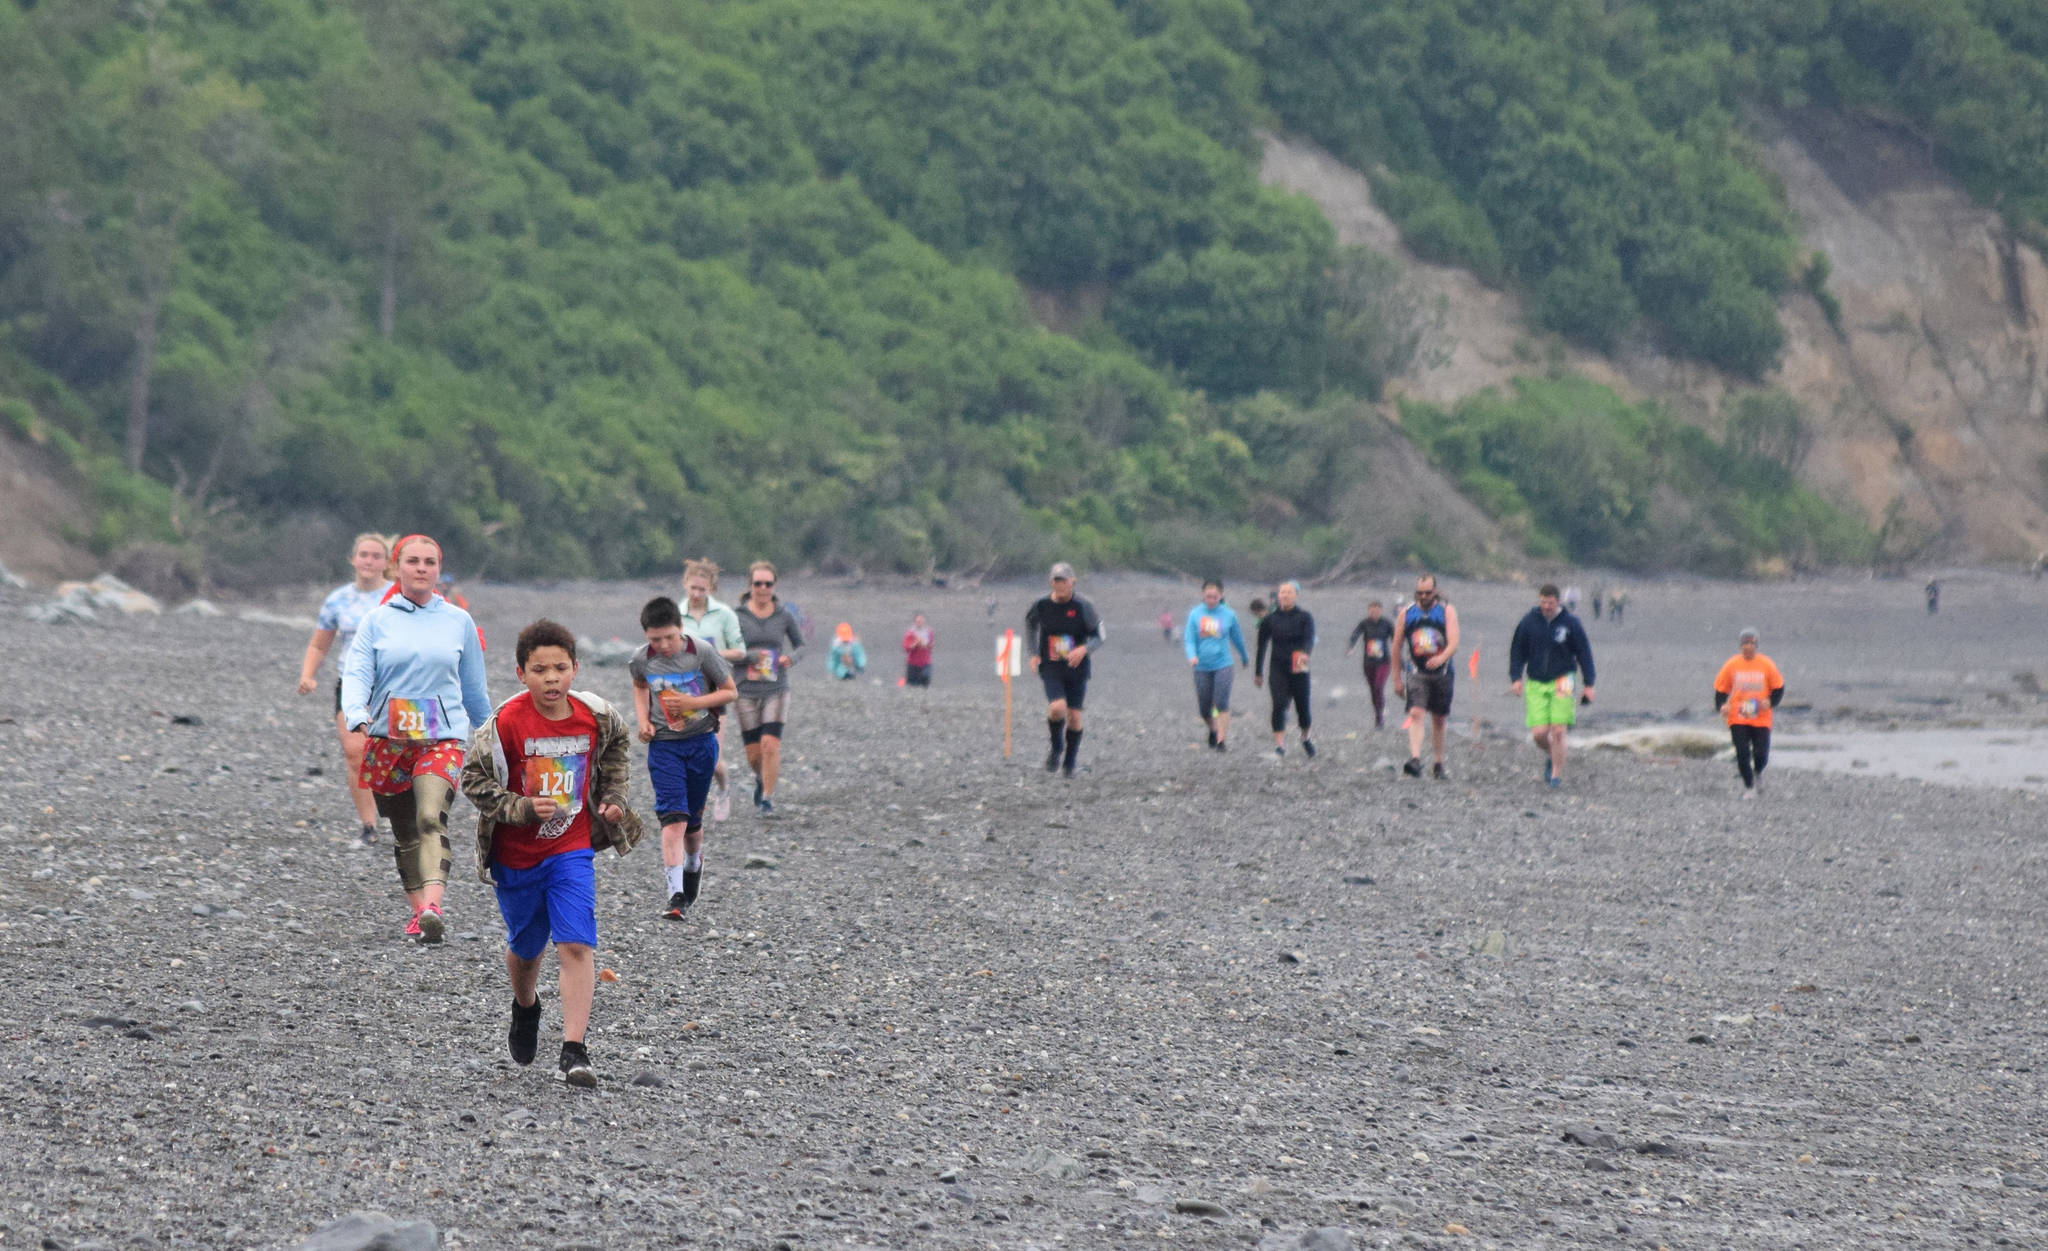 The field of 131 runners race down the beach Saturday, June 15, 2019, at the Ninilchik Clam Scramble Mud and Obstacle Run in Ninilchik, Alaska. (Photo by Joey Klecka/Peninsula Clarion)